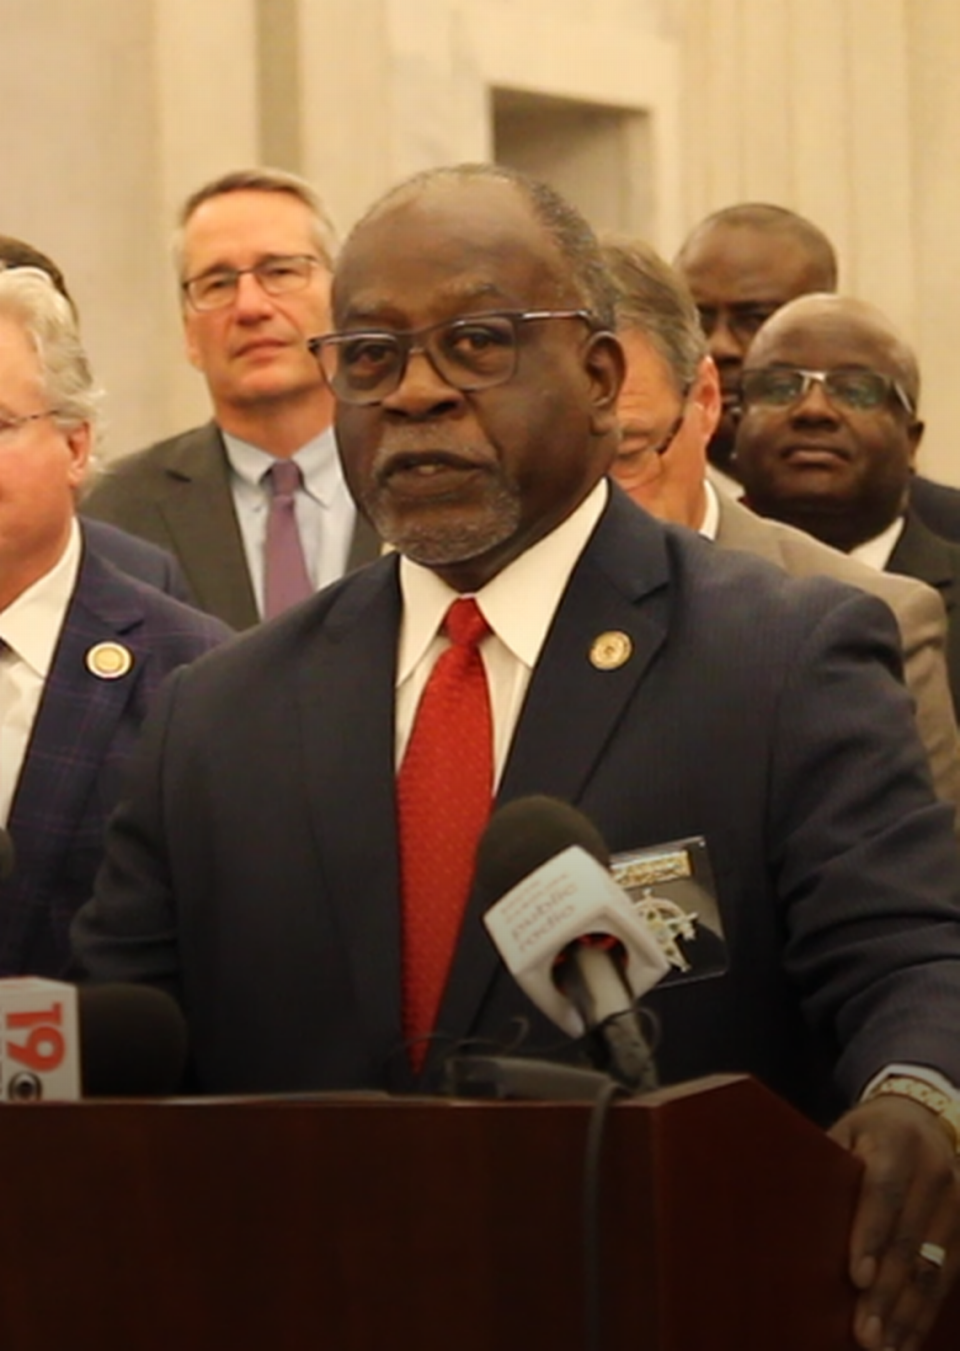 Orangeburg County Sheriff Leroy Ravenell thanks the South Carolina House for passing a bond reform bill on March 1, 2023.